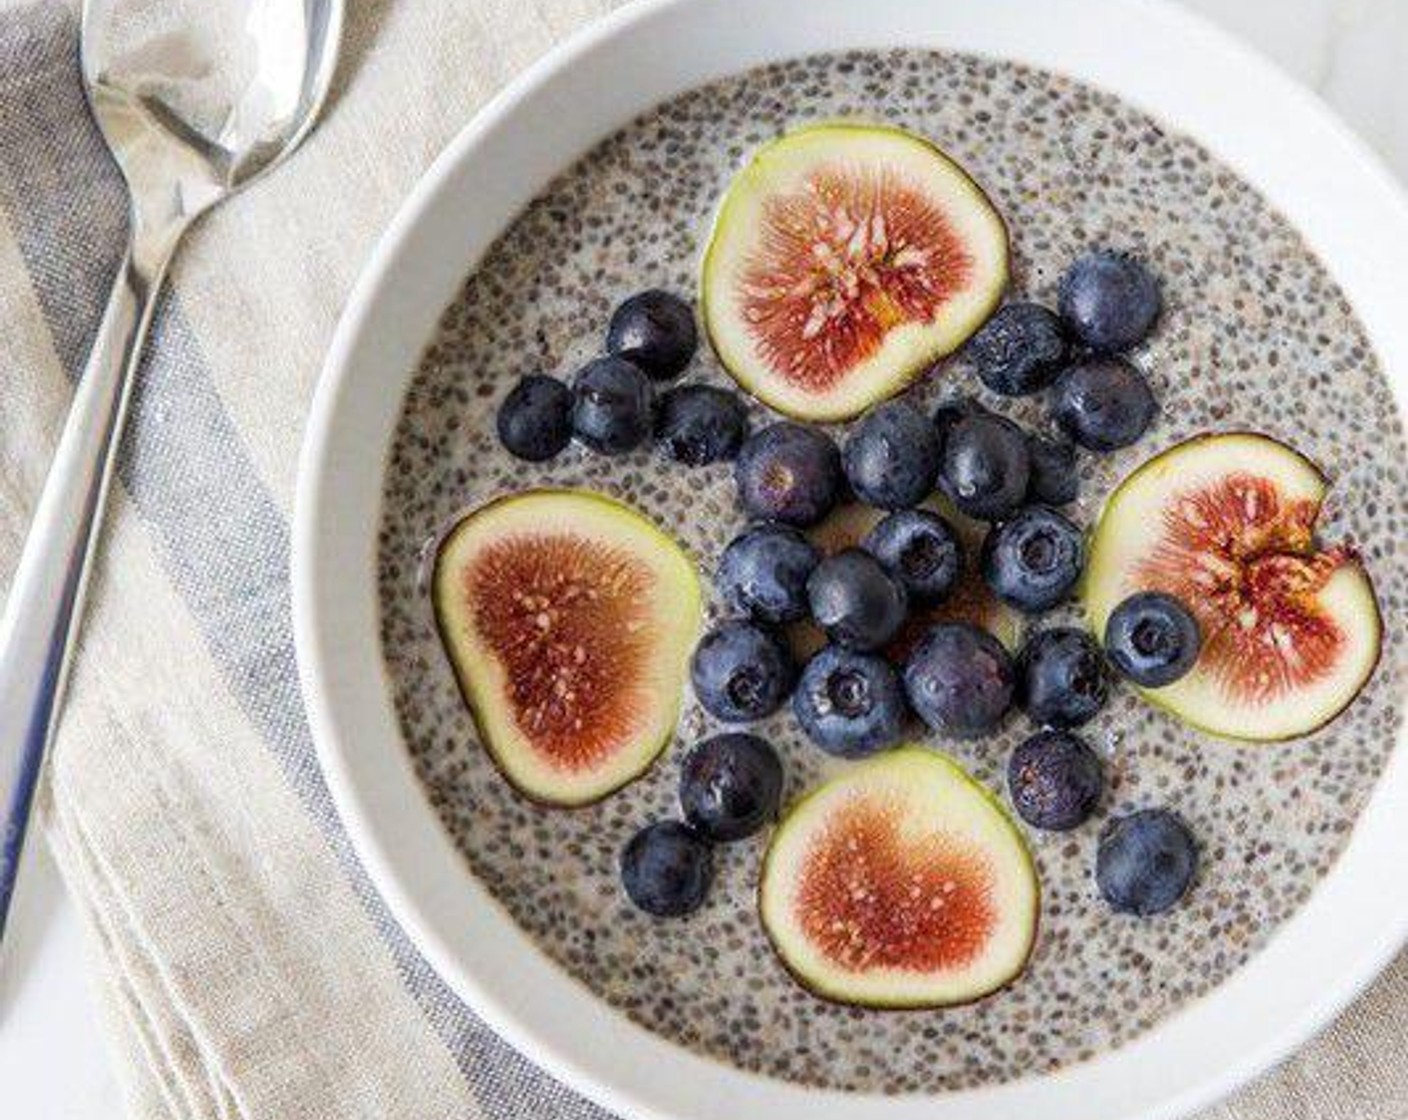 step 1 Mix together Cashew Milk (2 cups), Chia Seeds (1/2 cup), Vanilla Extract (1/2 tsp), Honey (2 Tbsp) in a bowl. Cover and refrigerate overnight. Top with Fresh Blueberry (1/2 cup) and Figs (4) in the morning. Serve and enjoy!